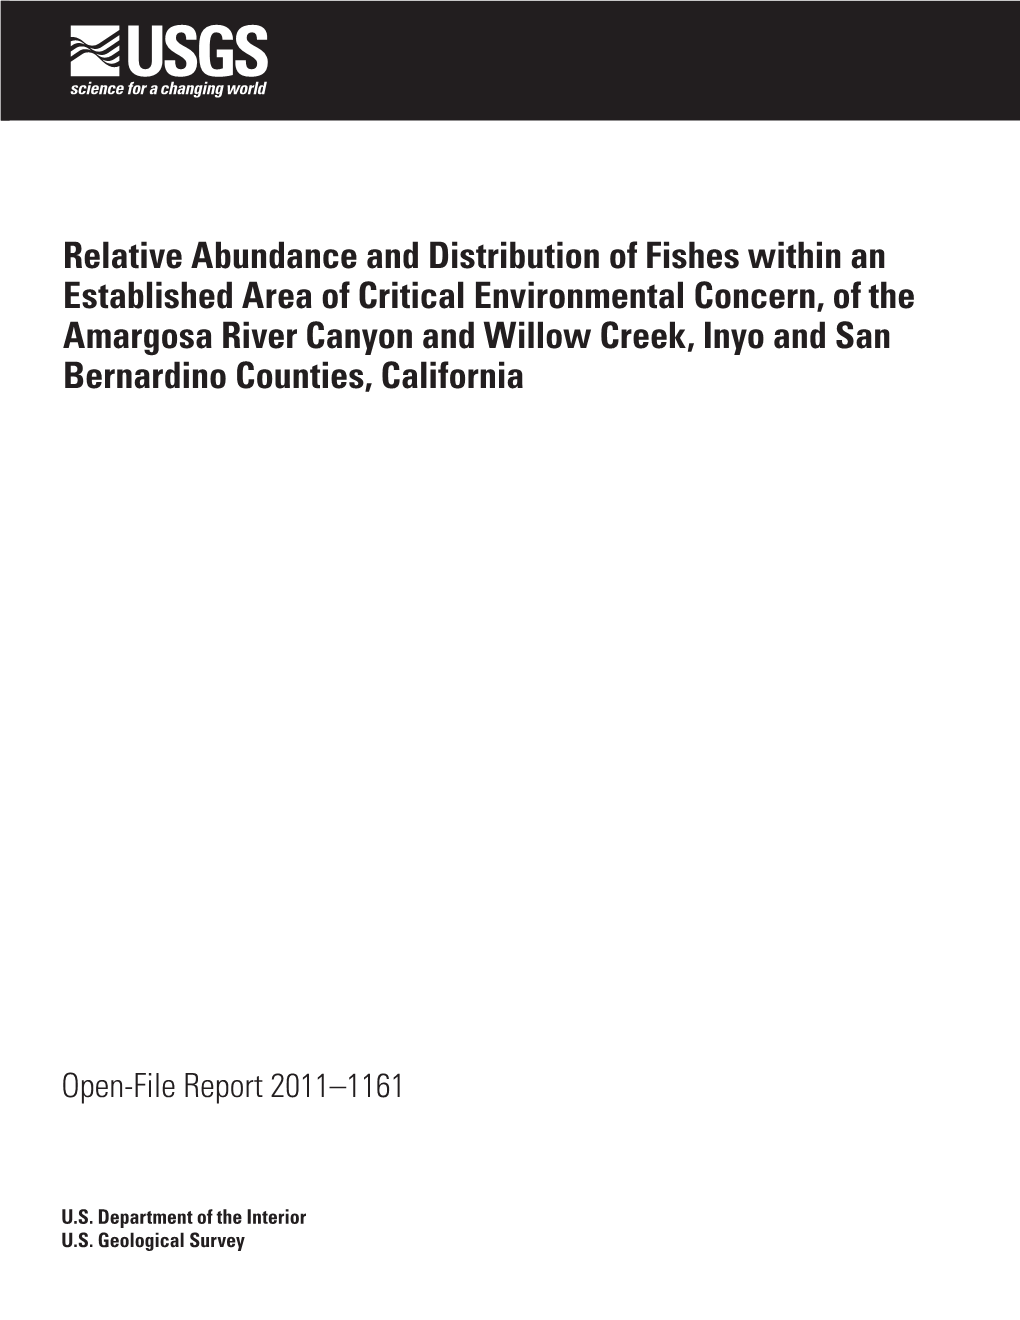 Relative Abundance and Distribution of Fishes Within an Established